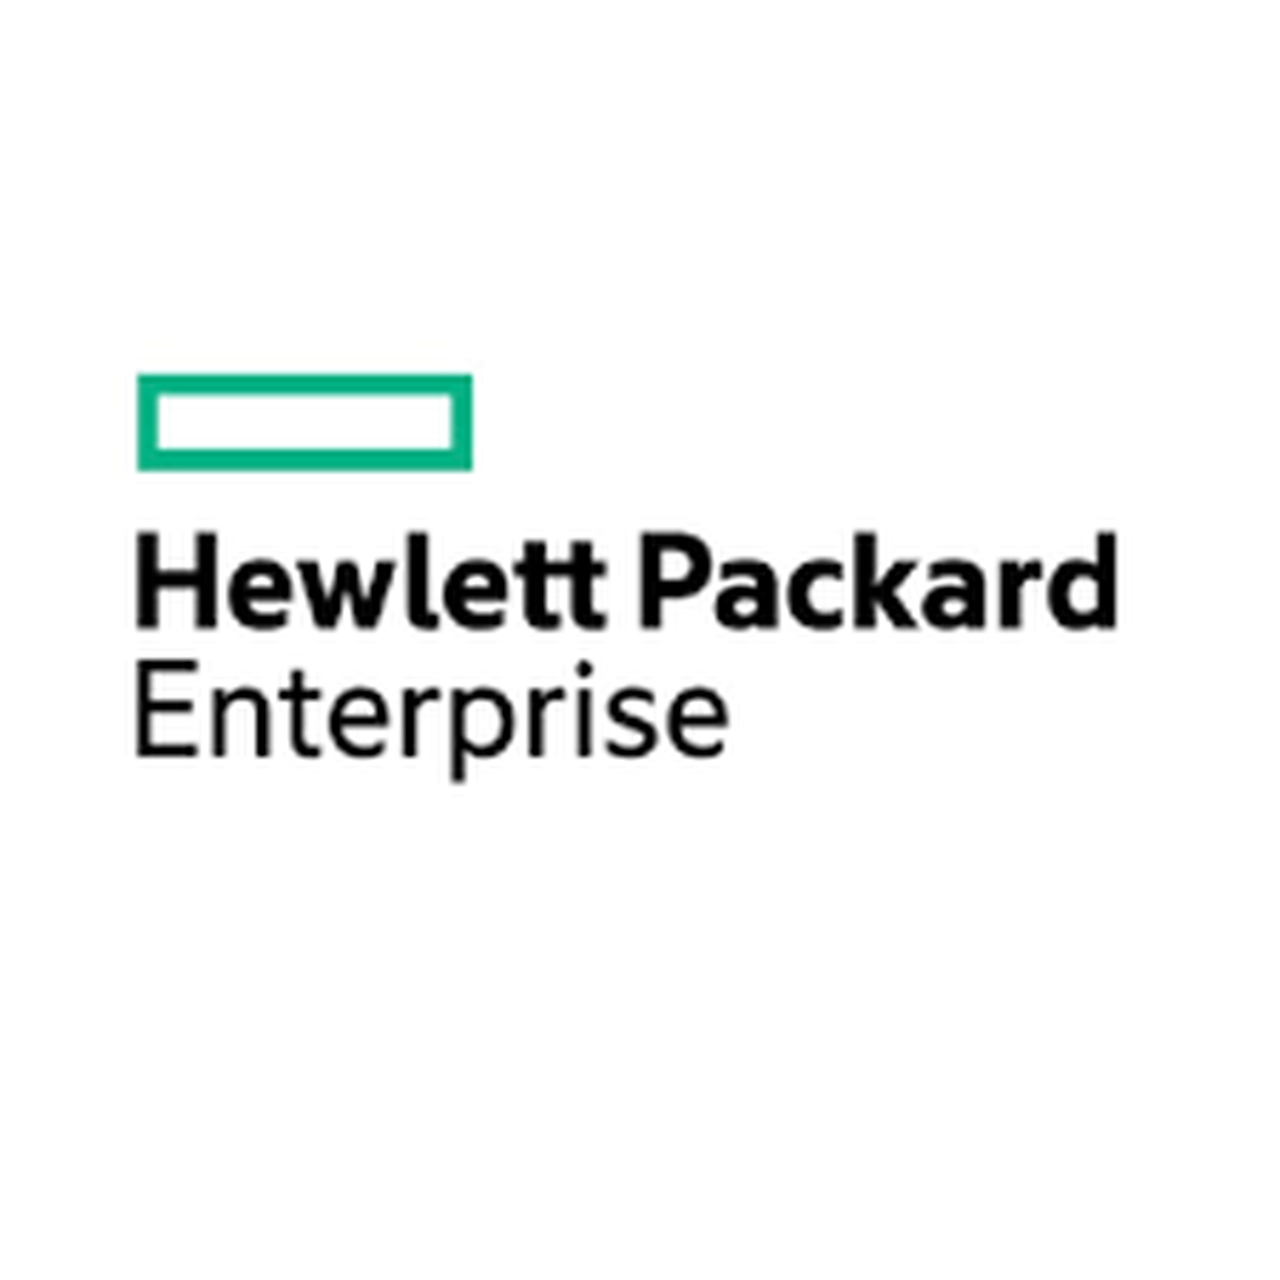 HPE 1 Year Post Warranty Proactive Care, 24x7 wDMR DL380 G7 Service